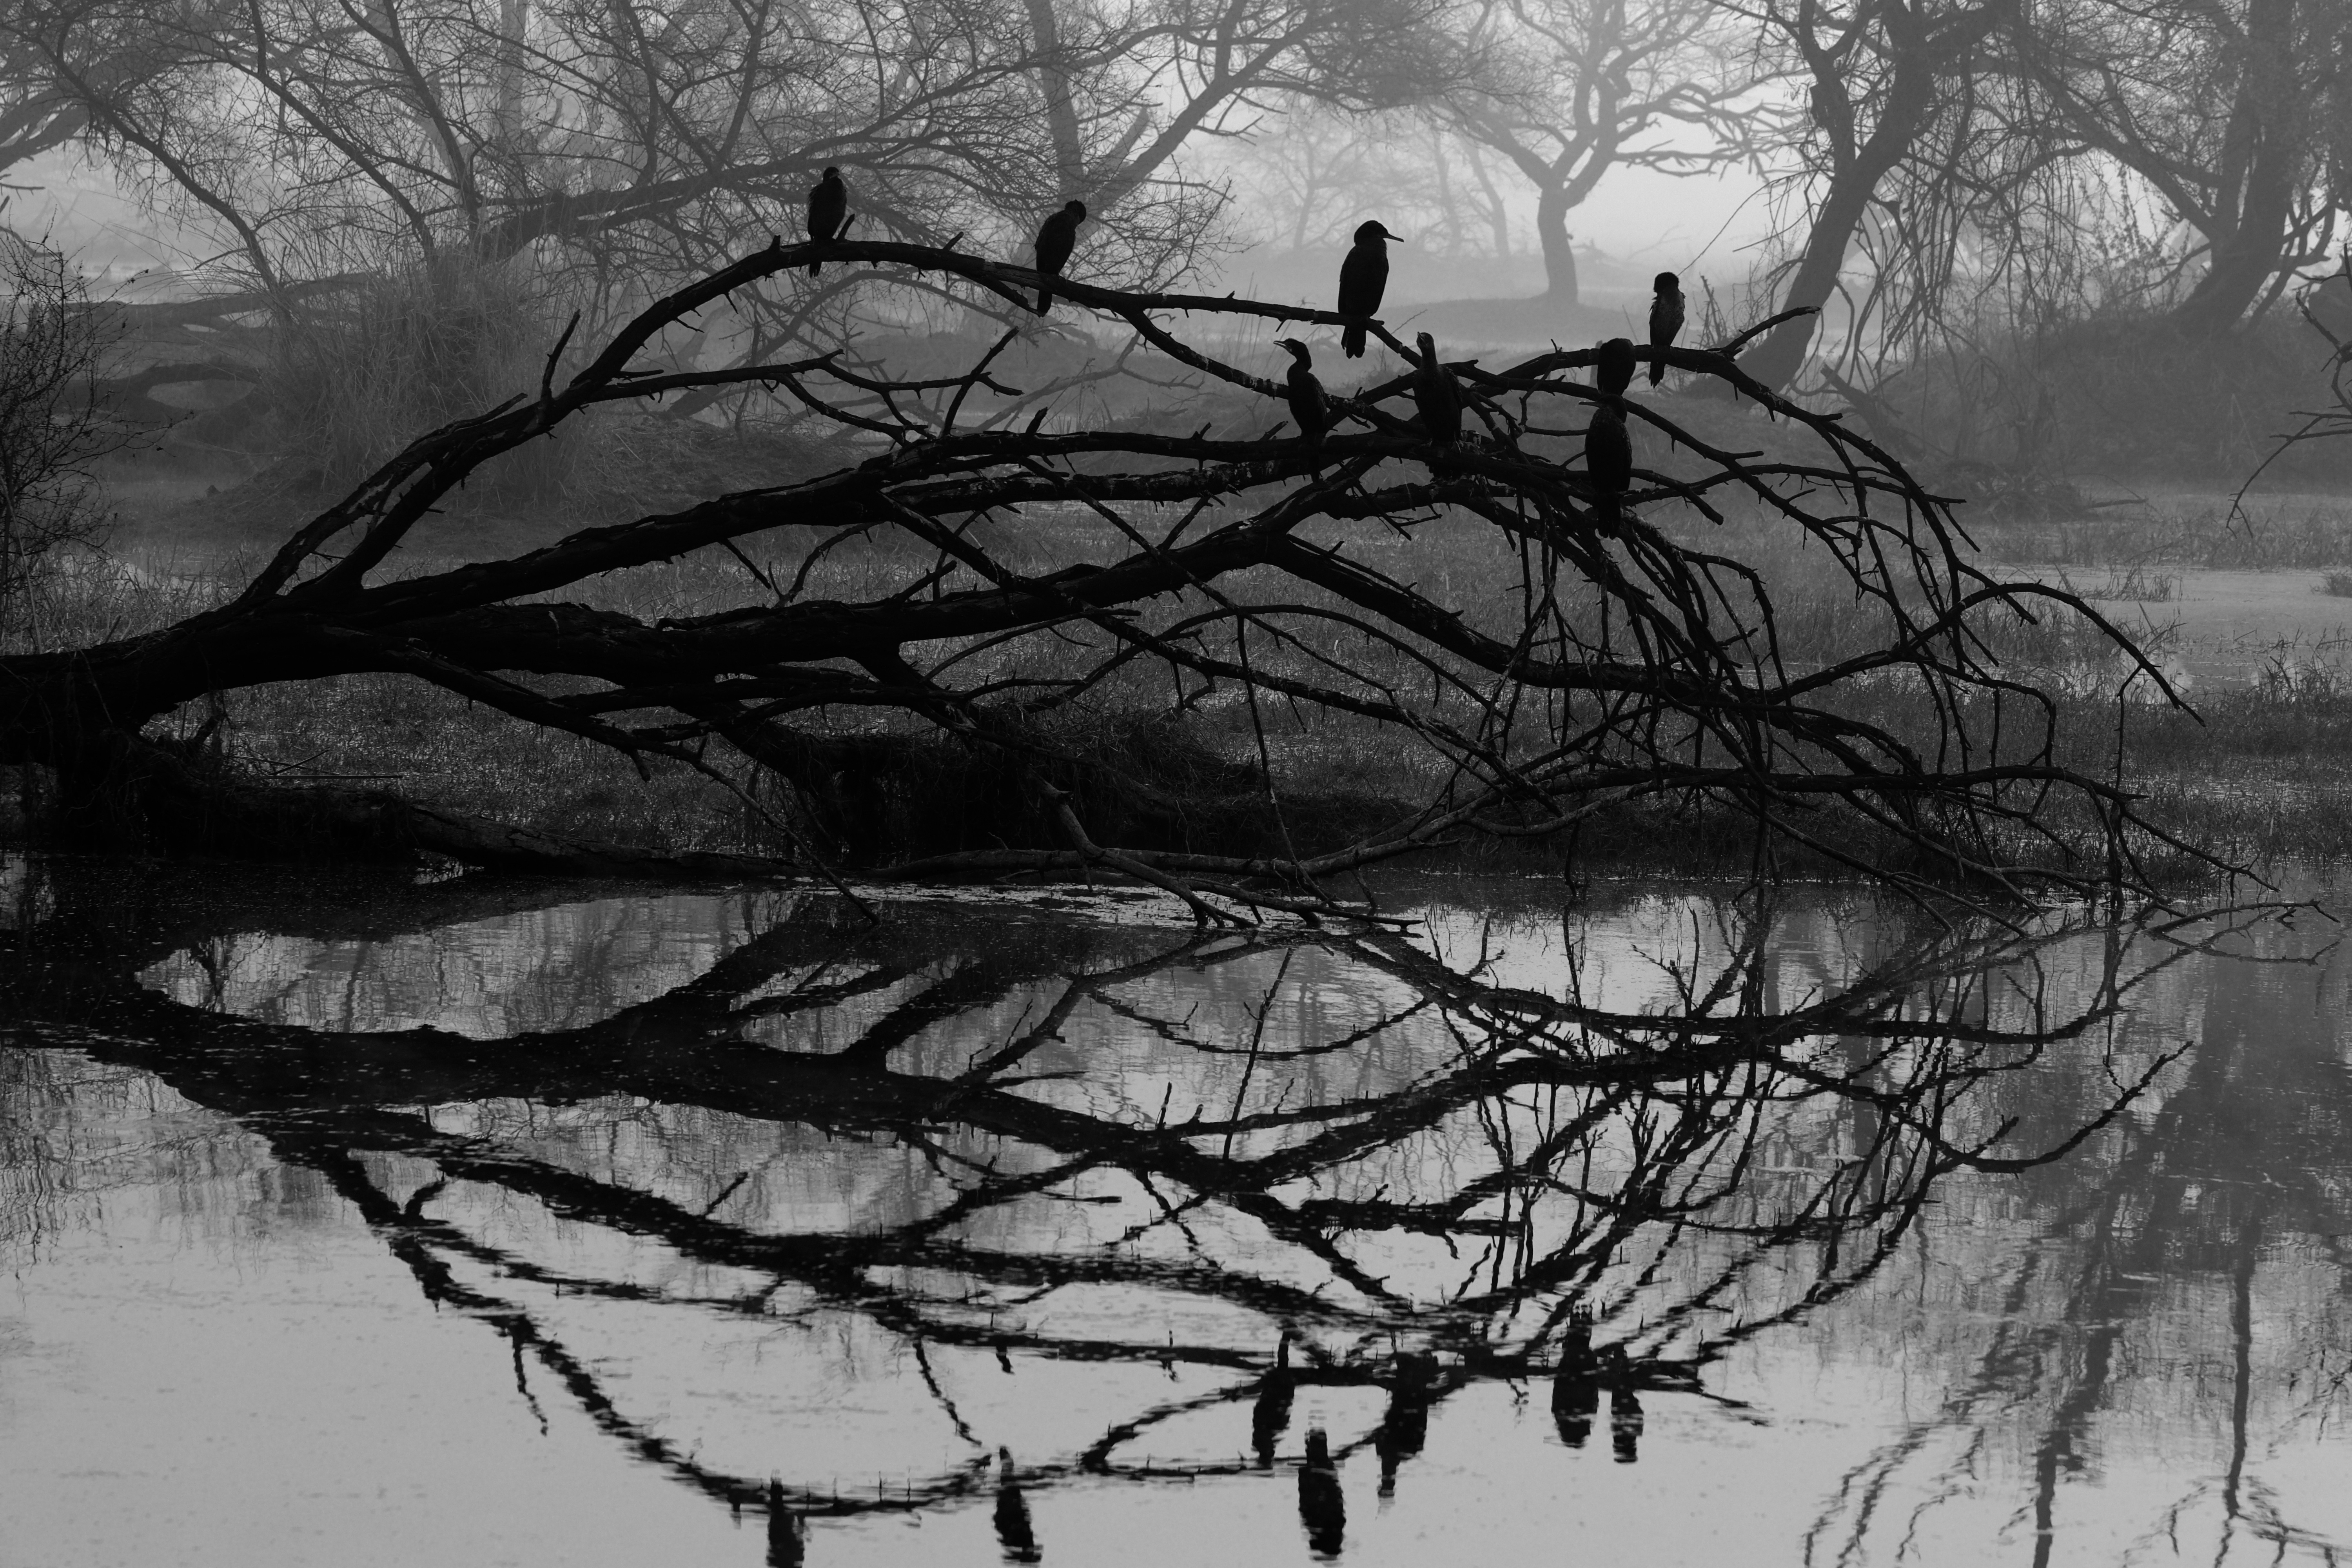 74472 download wallpaper tree, nature, reflection, bird, wood, bw, chb screensavers and pictures for free